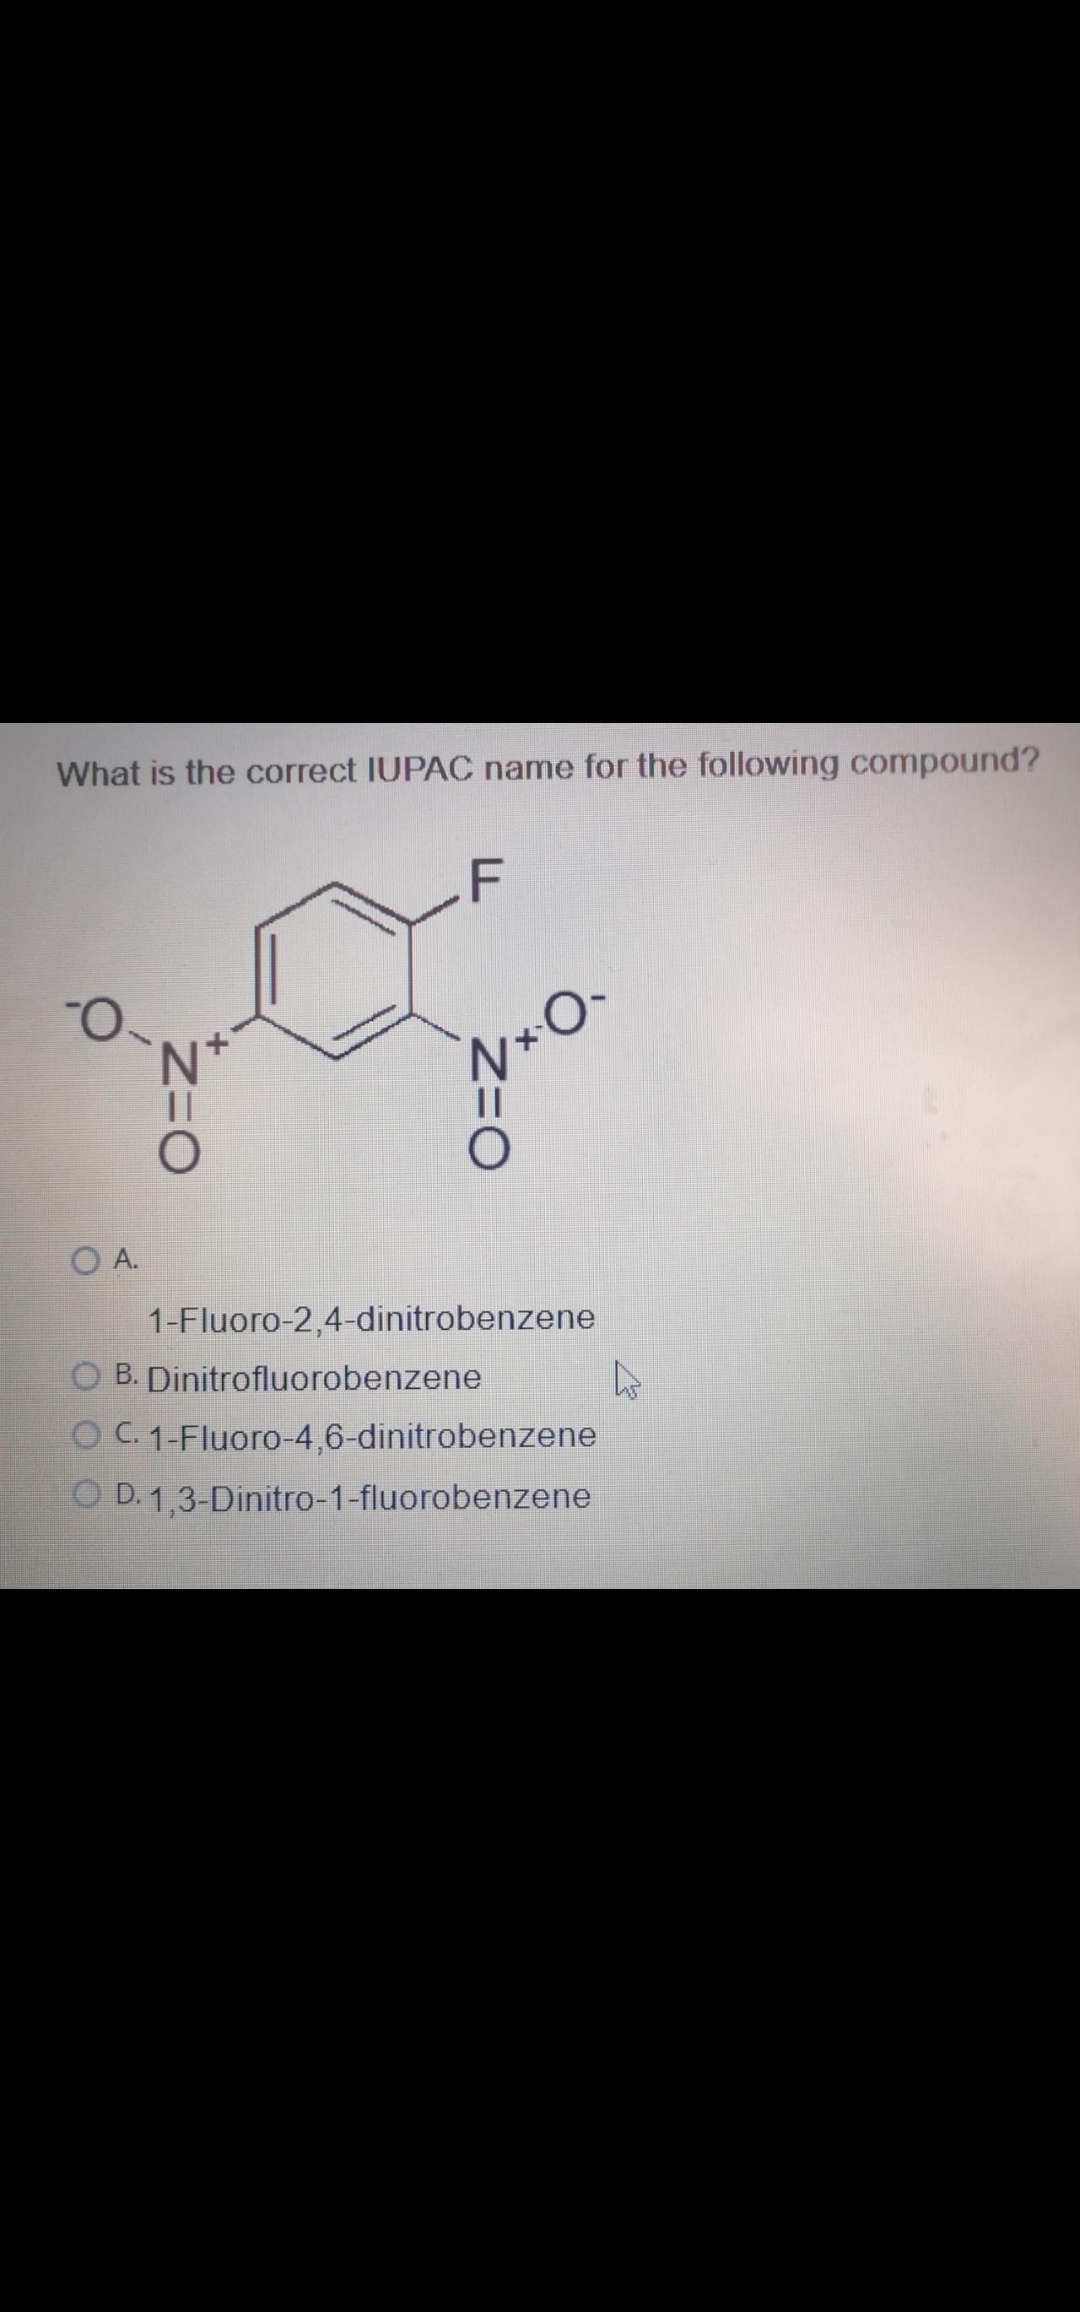 What is the correct IUPAC name for the following compound?
O A.
1-Fluoro-2,4-dinitrobenzene
O B. Dinitrofluorobenzene
O C. 1-Fluoro-4,6-dinitrobenzene
O D. 1,3-Dinitro-1-fluorobenzene
Z=O
